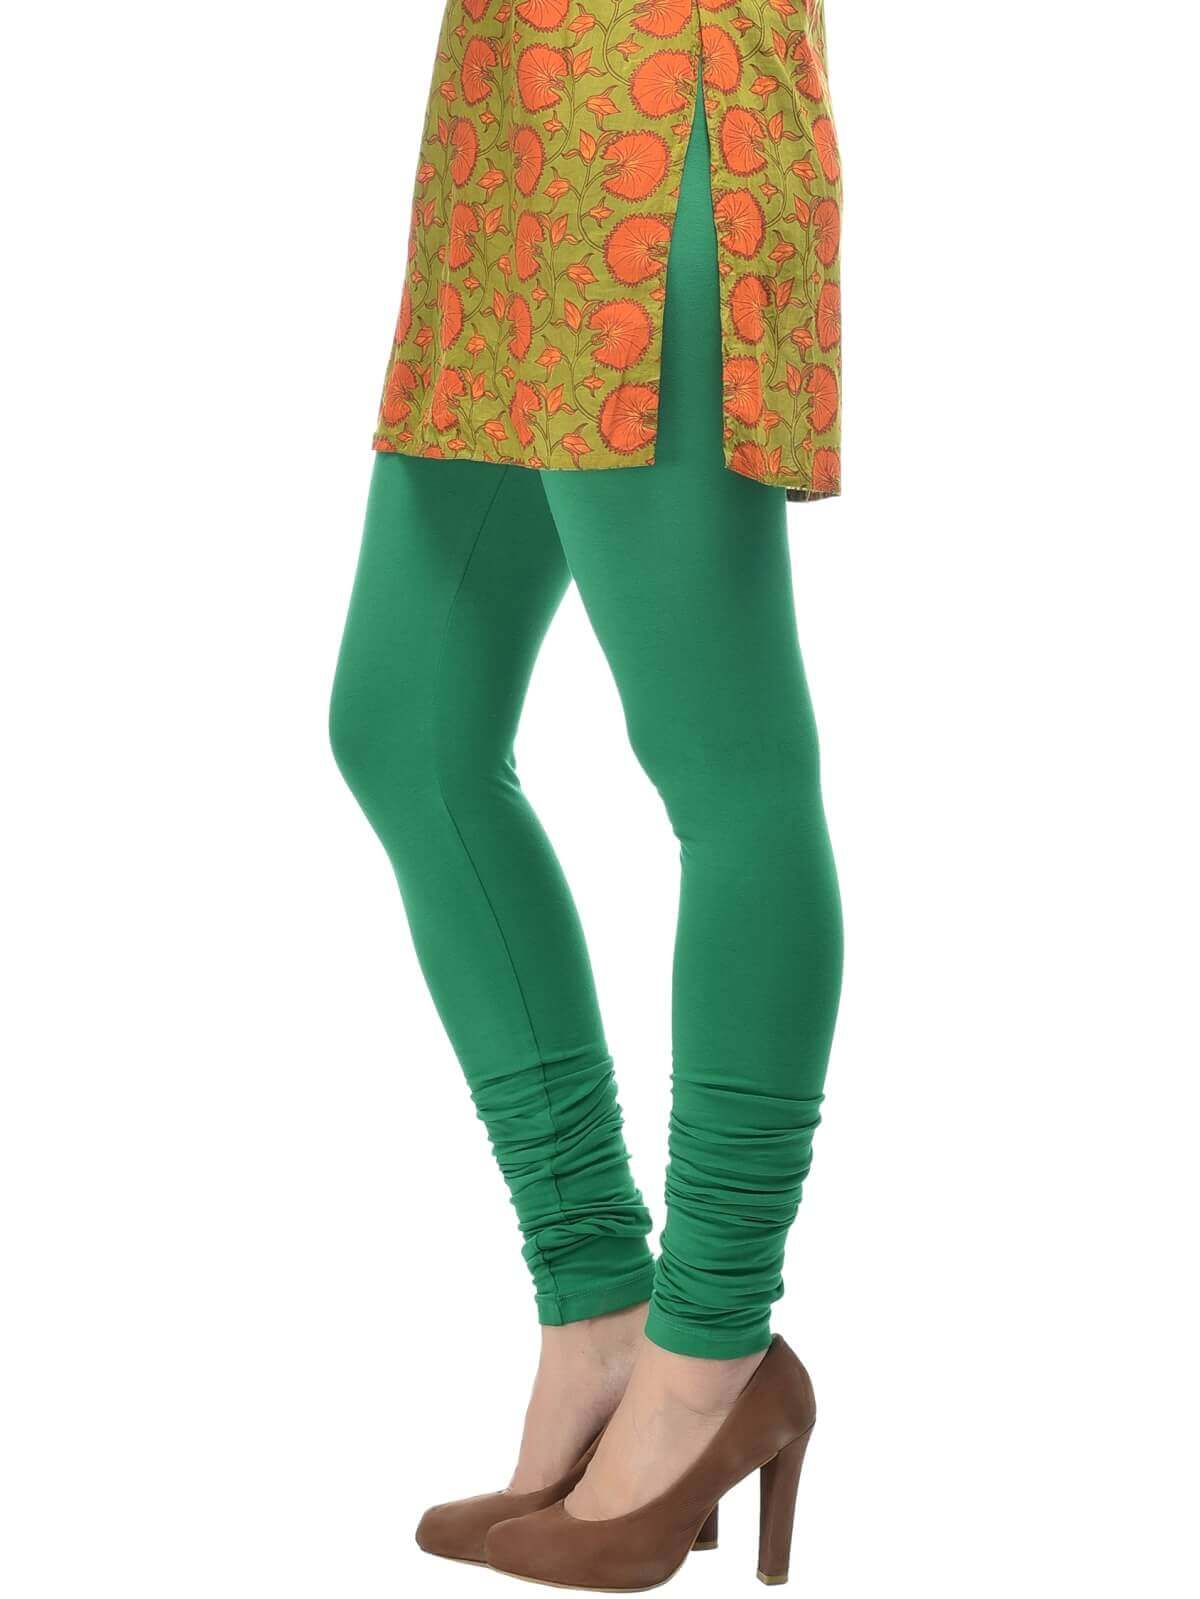 Indian 100% Pure Cotton Green Color Churidar Soft And Comfortable Cotton  Leggings at Best Price in Neemuch | Sudhir Hosiery